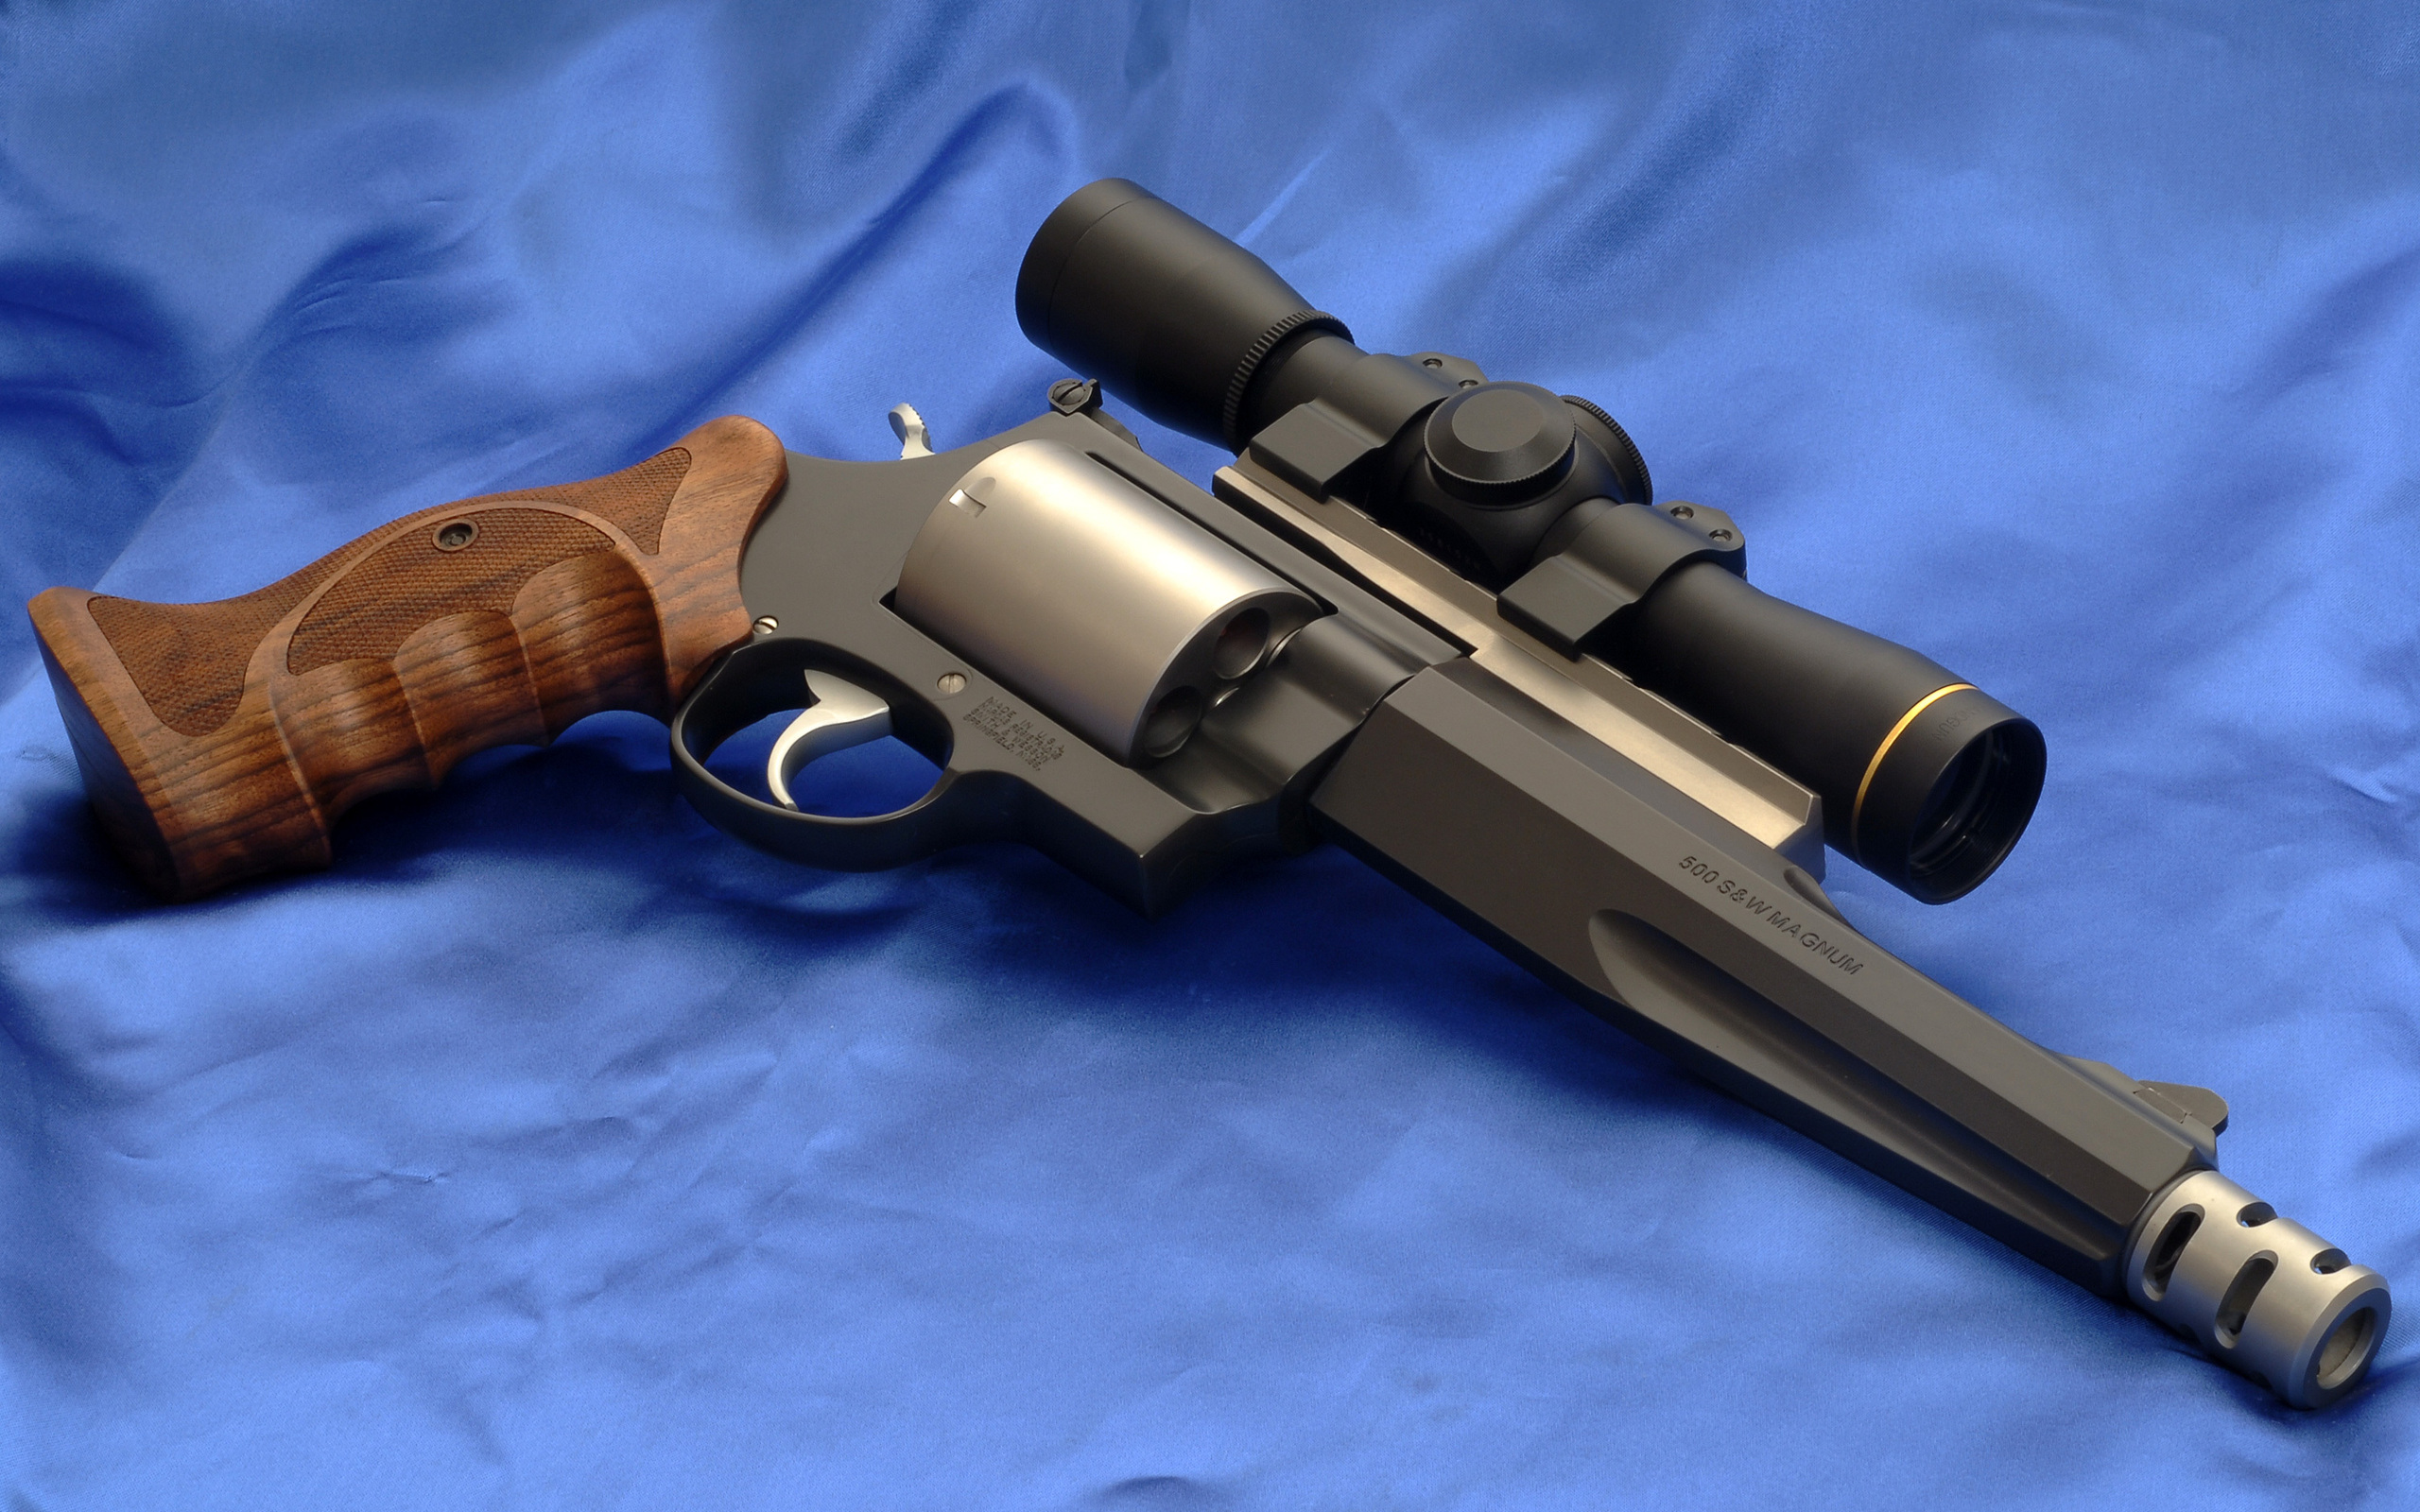 Weapons Smith Amp Wesson 500 Magnum Revolver 2560x1600